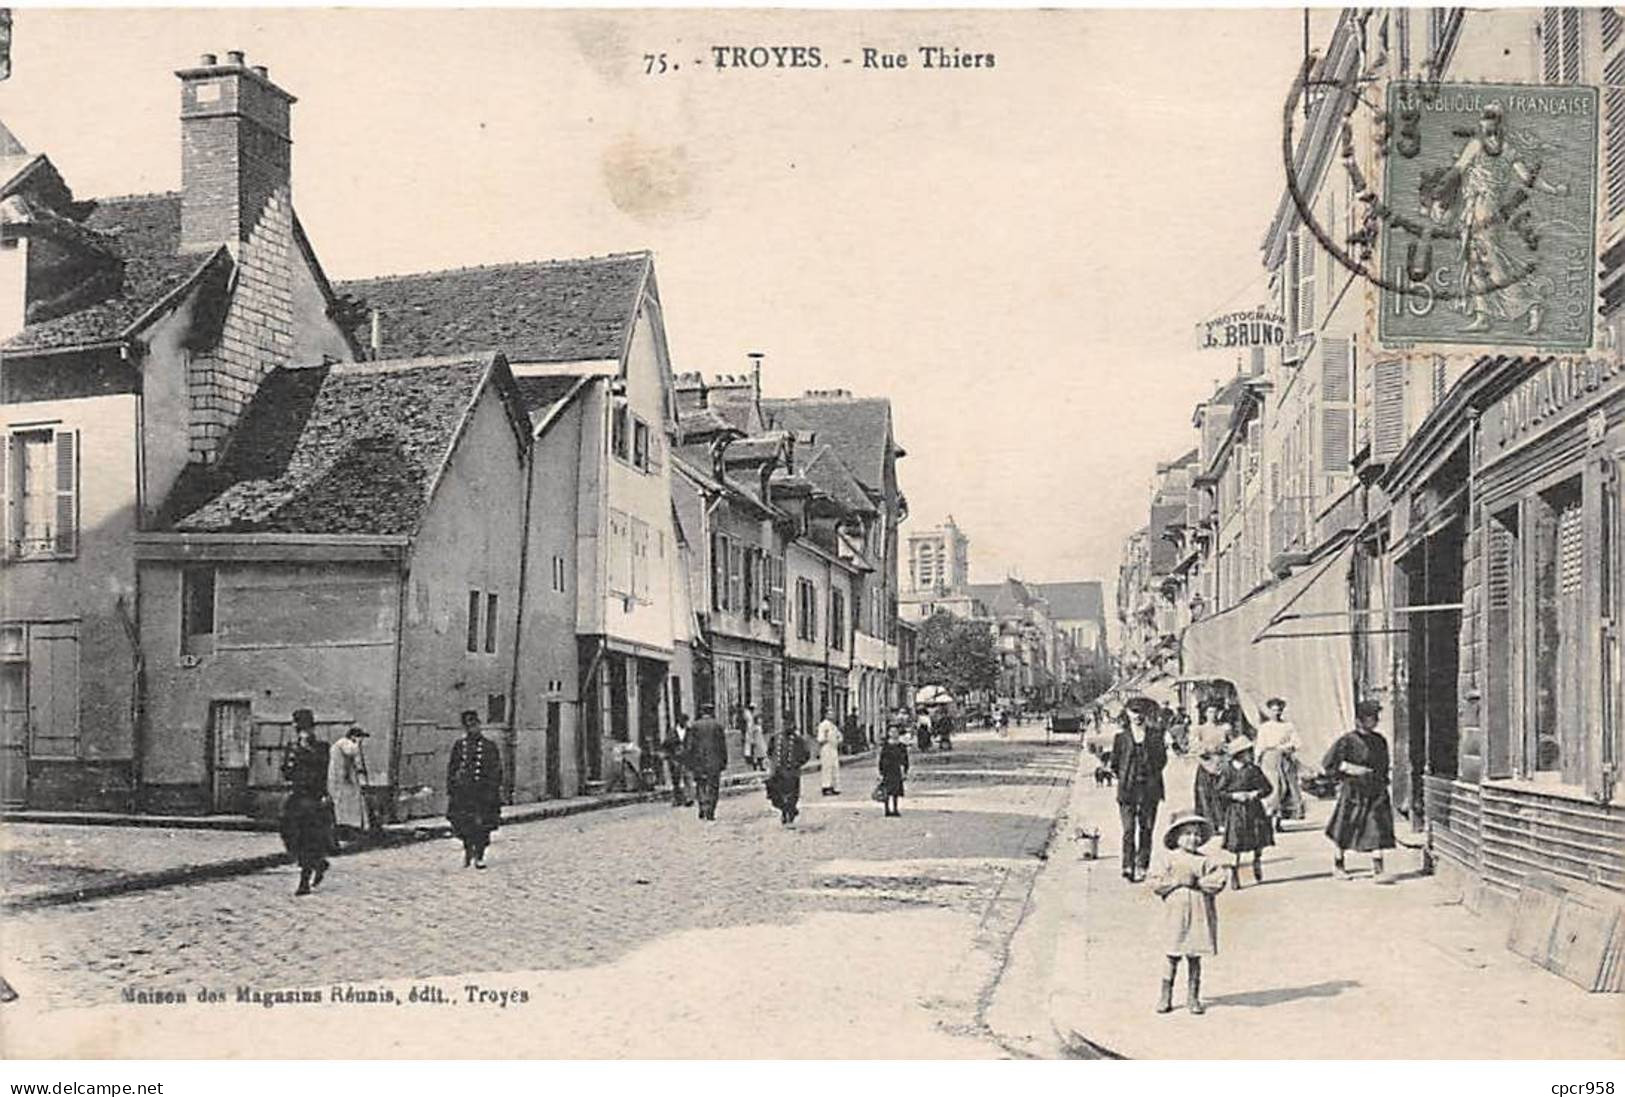 10 - TROYES - SAN58116 - Rue Thiers - Troyes